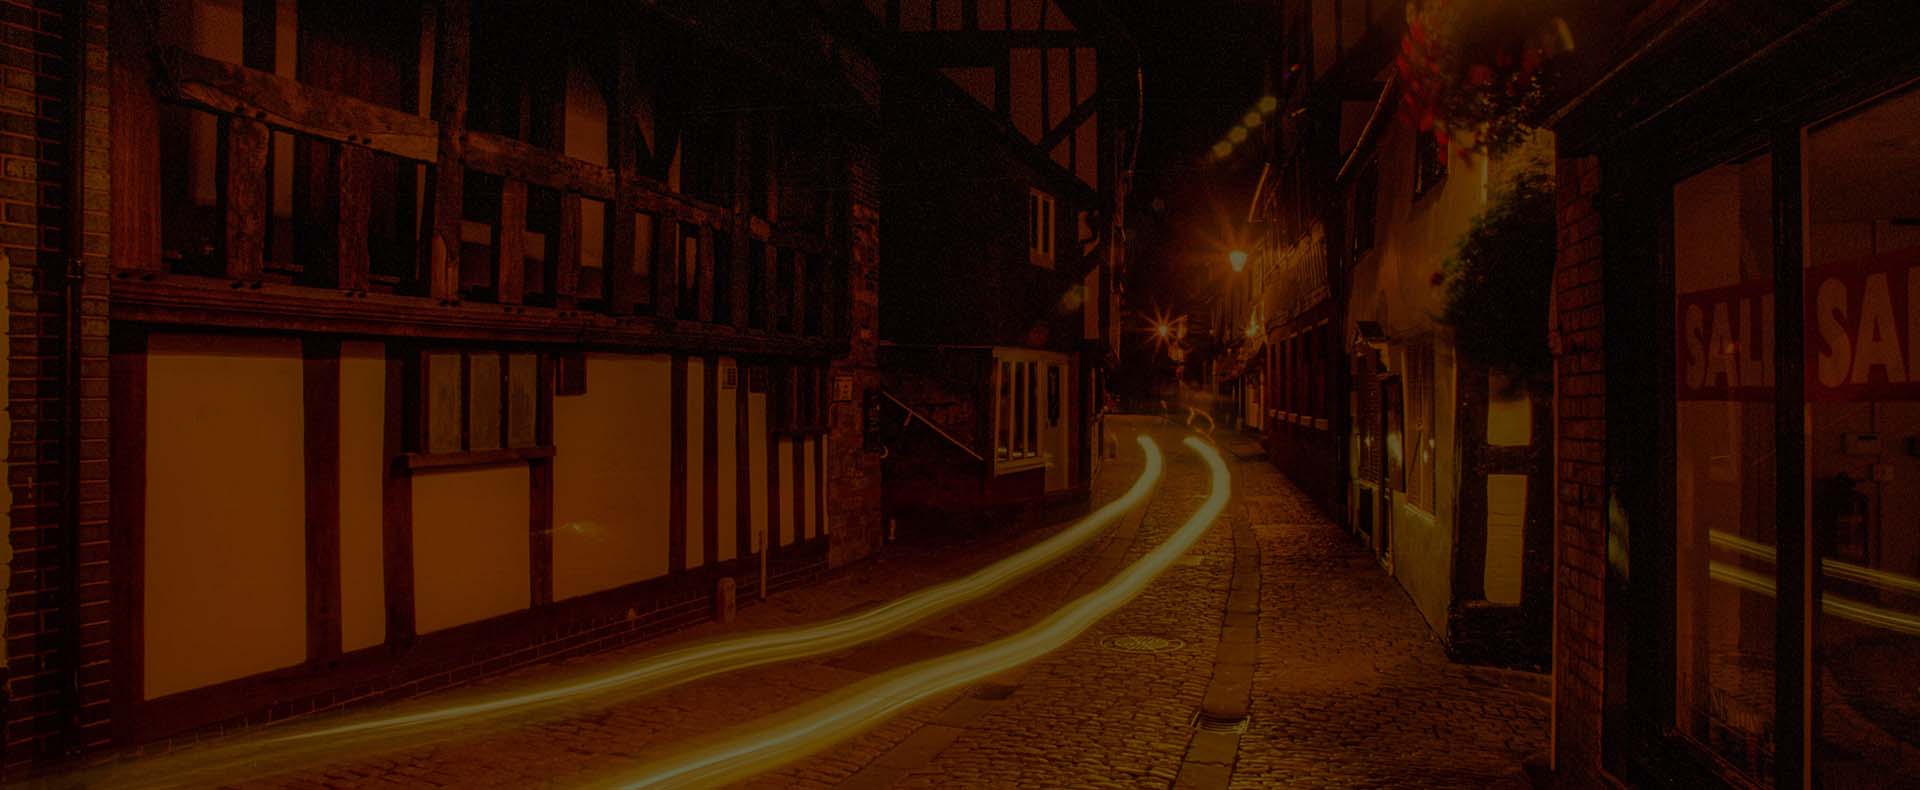 shrewsbury old town with lights and old buildings